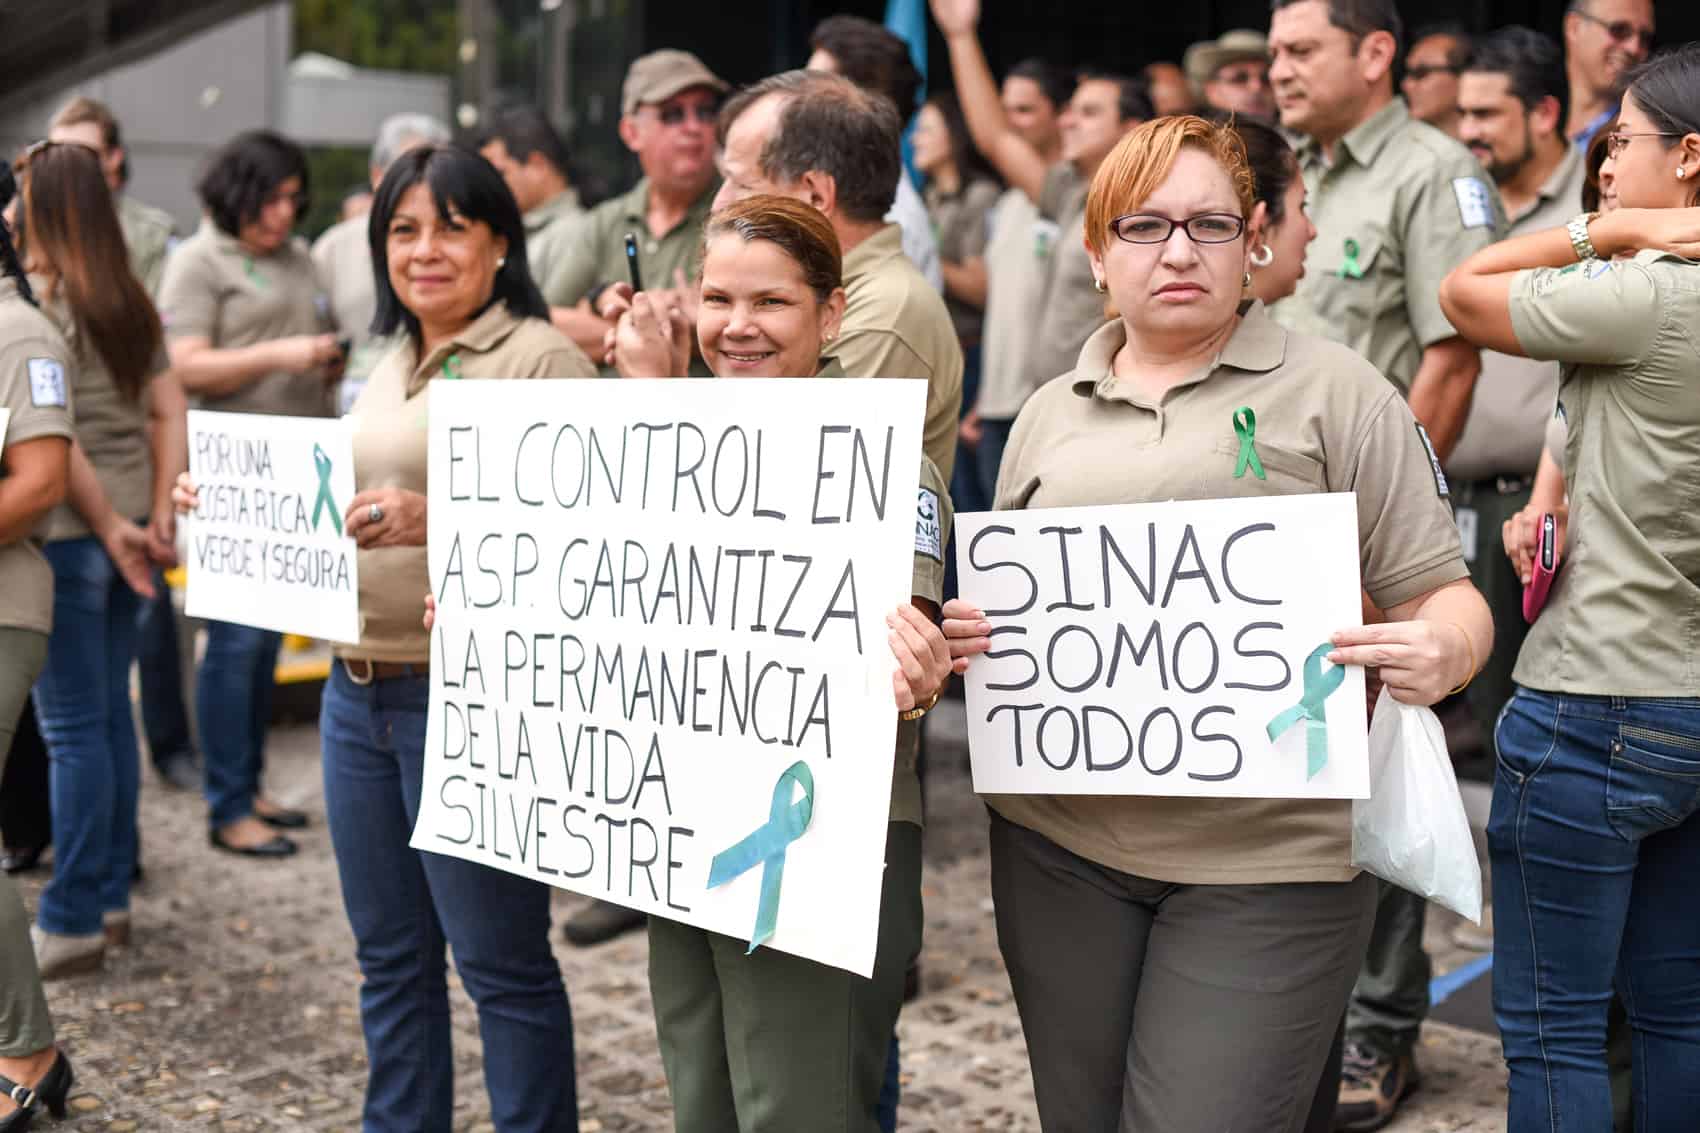 SINAC employees protest in front of the SINAC building in San José demanding better conditions for park rangers, Friday, September 04.